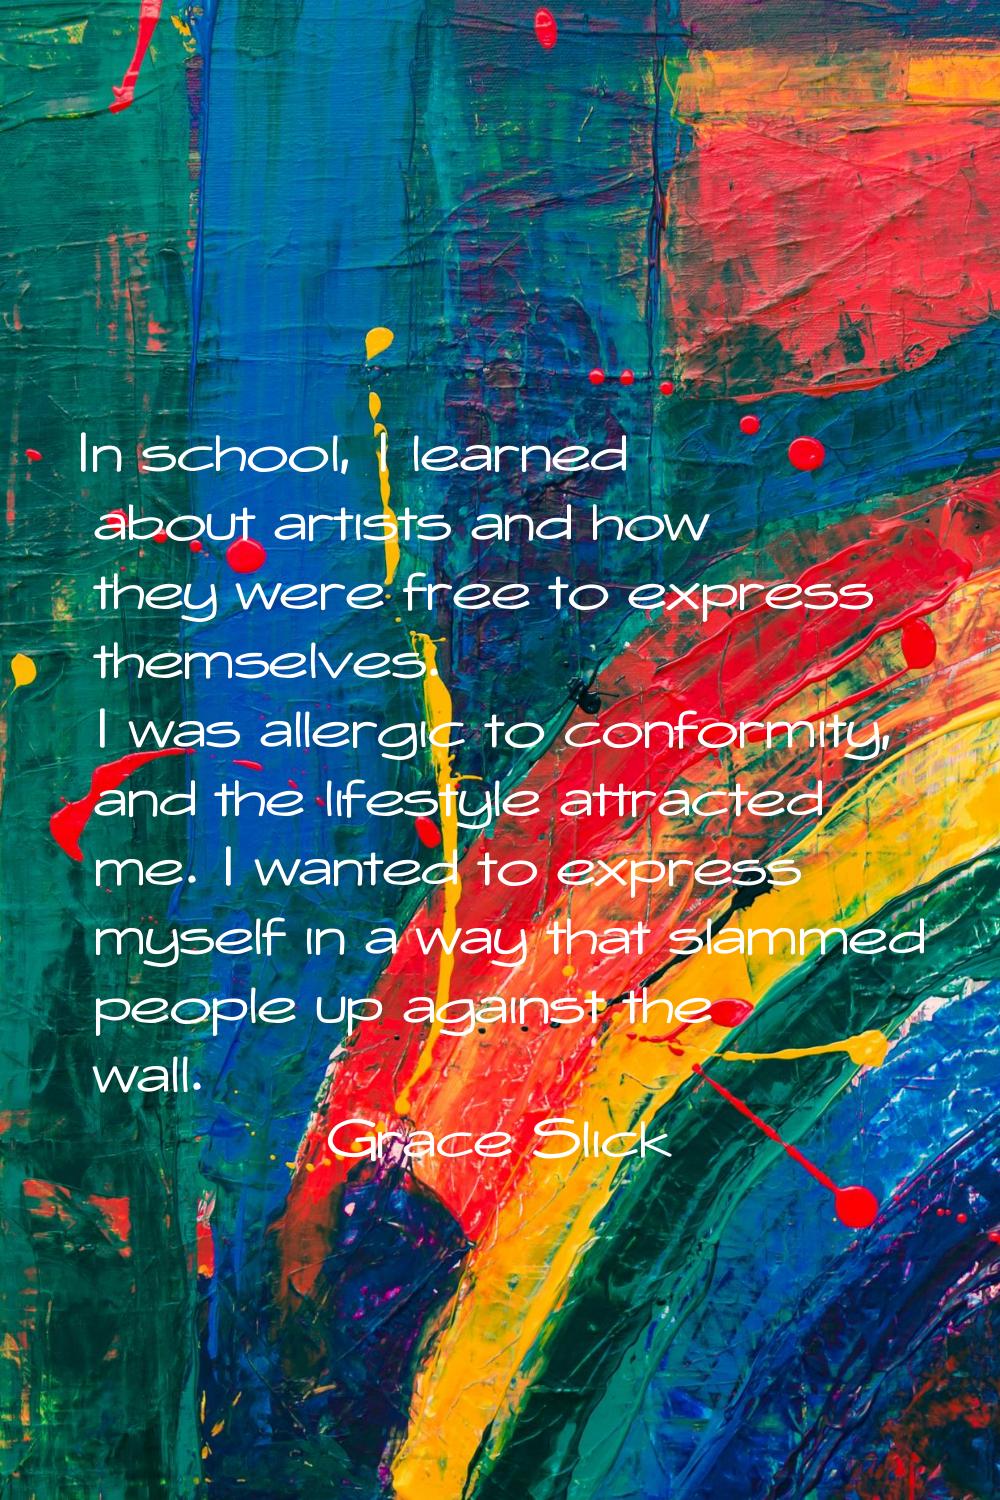 In school, I learned about artists and how they were free to express themselves. I was allergic to 